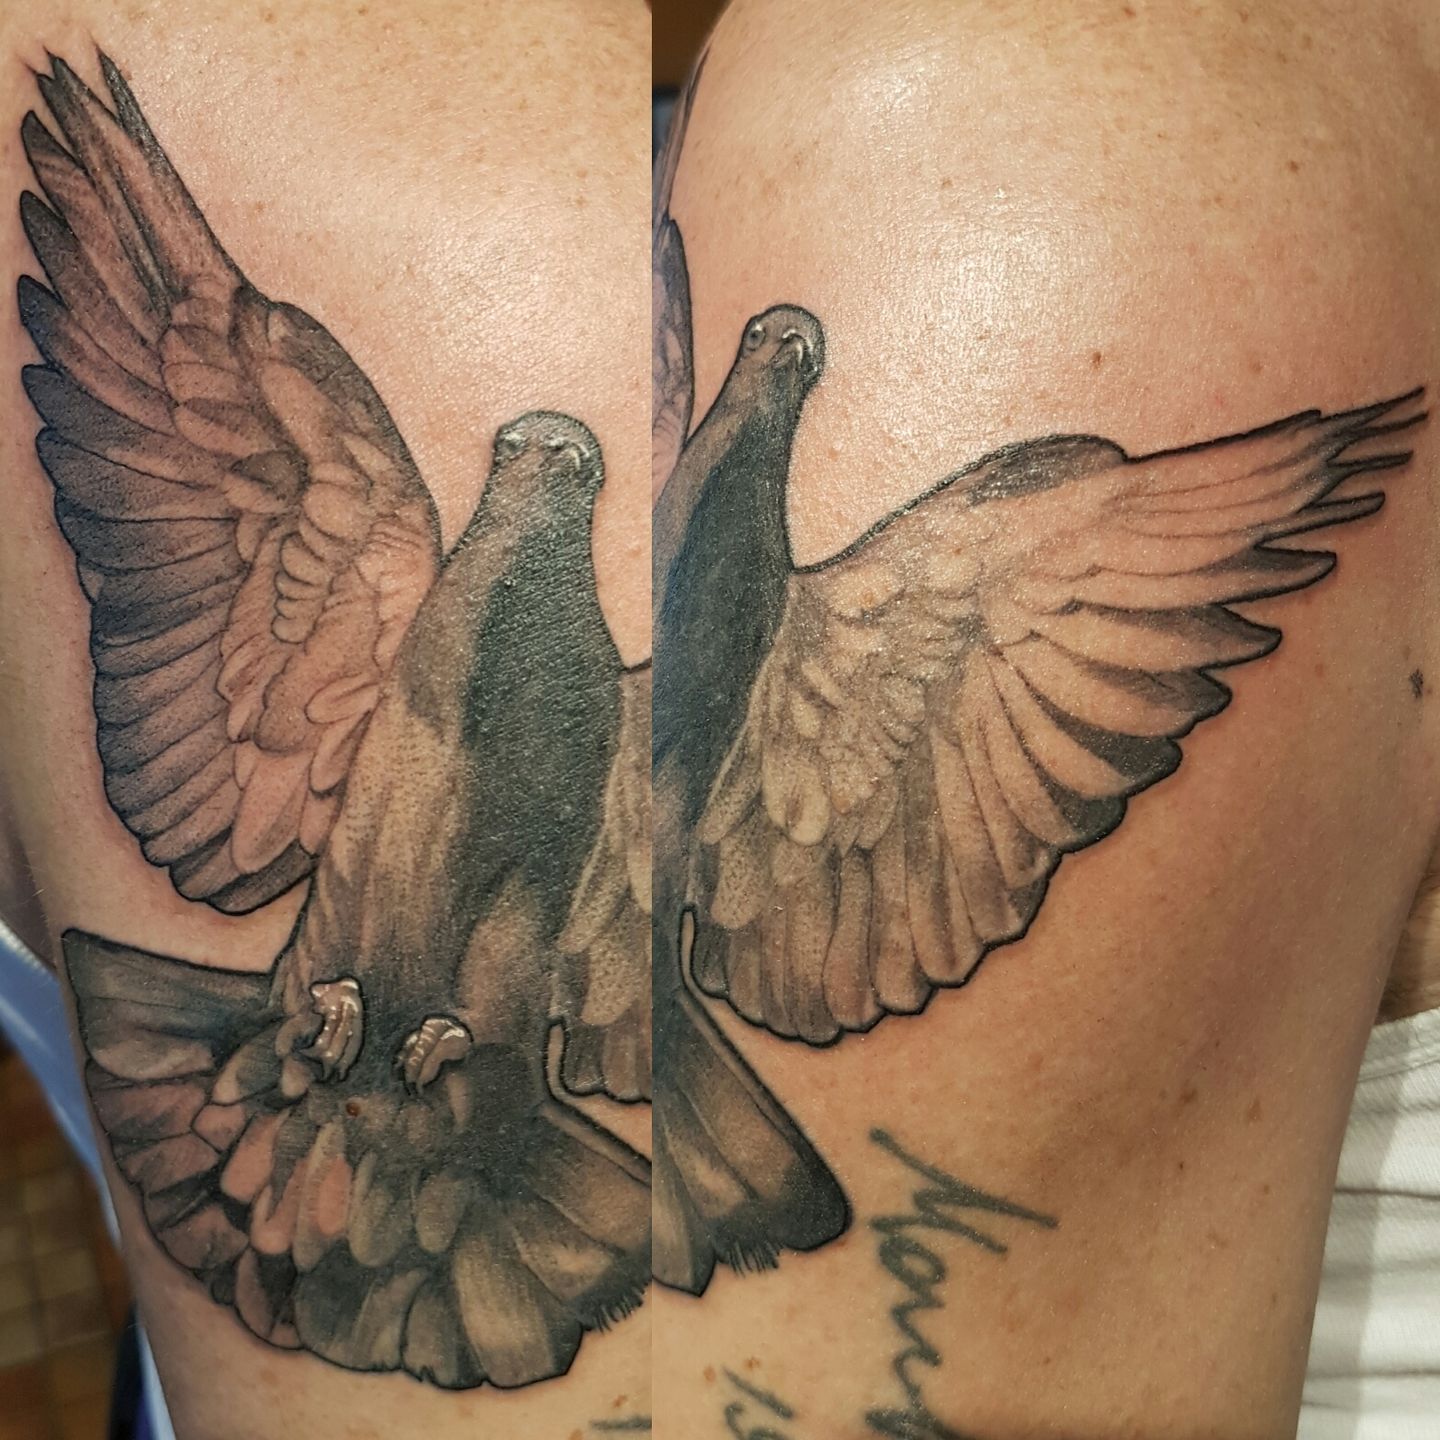 United By Ink Tattoo Shop - A peaceful and holy memorial tattoo done by  @marjetmendez DM her for appointments #tattoo #tattoos #tatted #tatt  #tattooartist #tattooart #tattooing #tattooshop #ink #professional #clean  #welldone #beautiful #